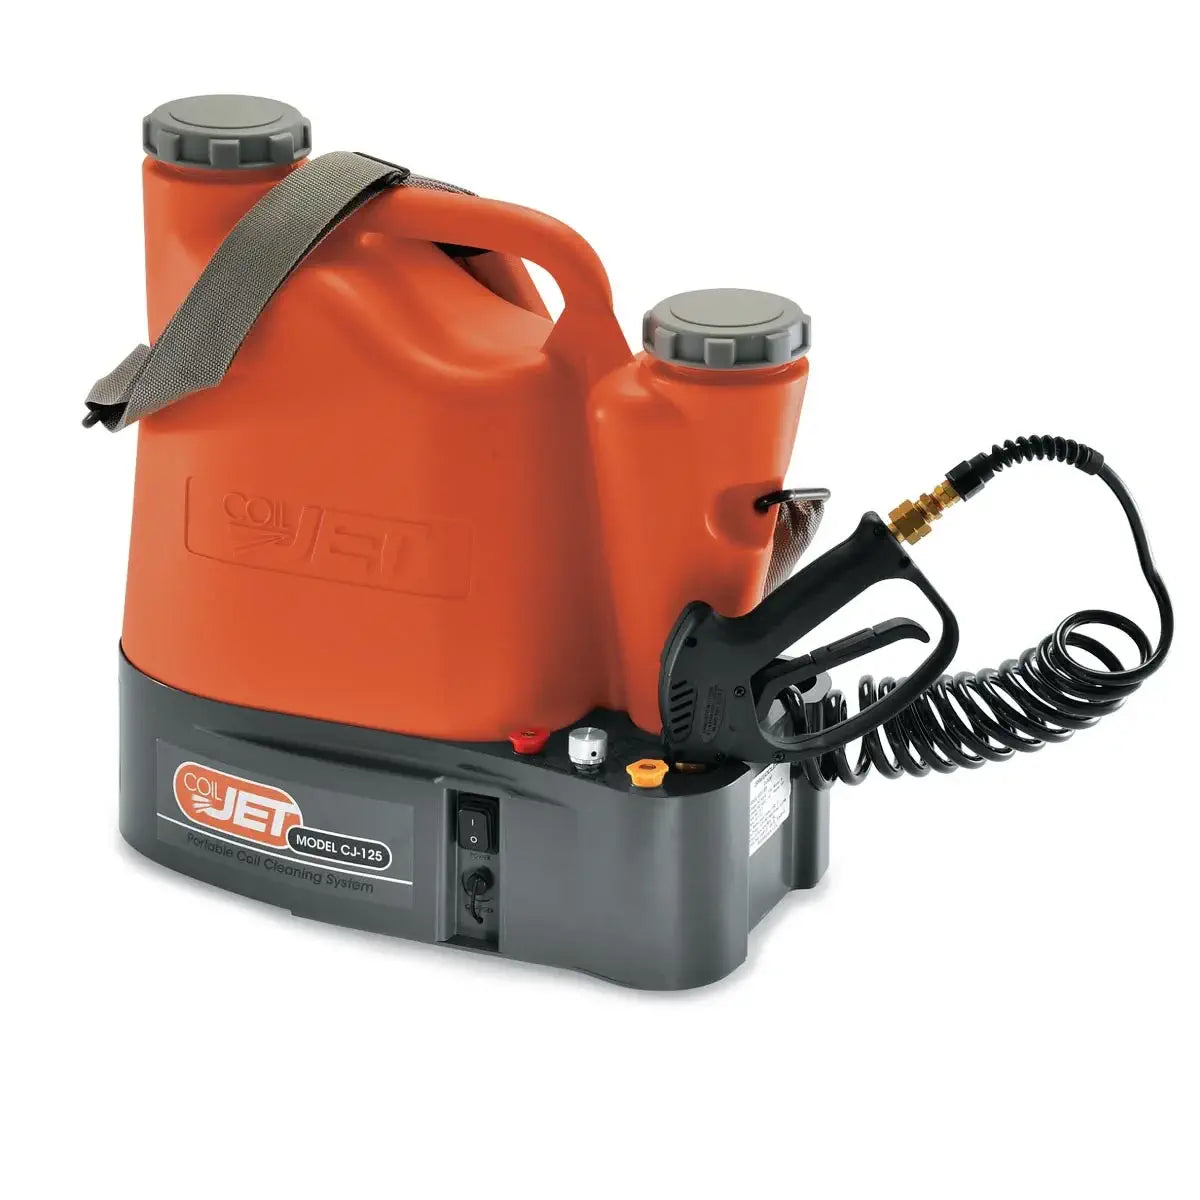 CoilJet CJ-125 Portable Coil Cleaning System